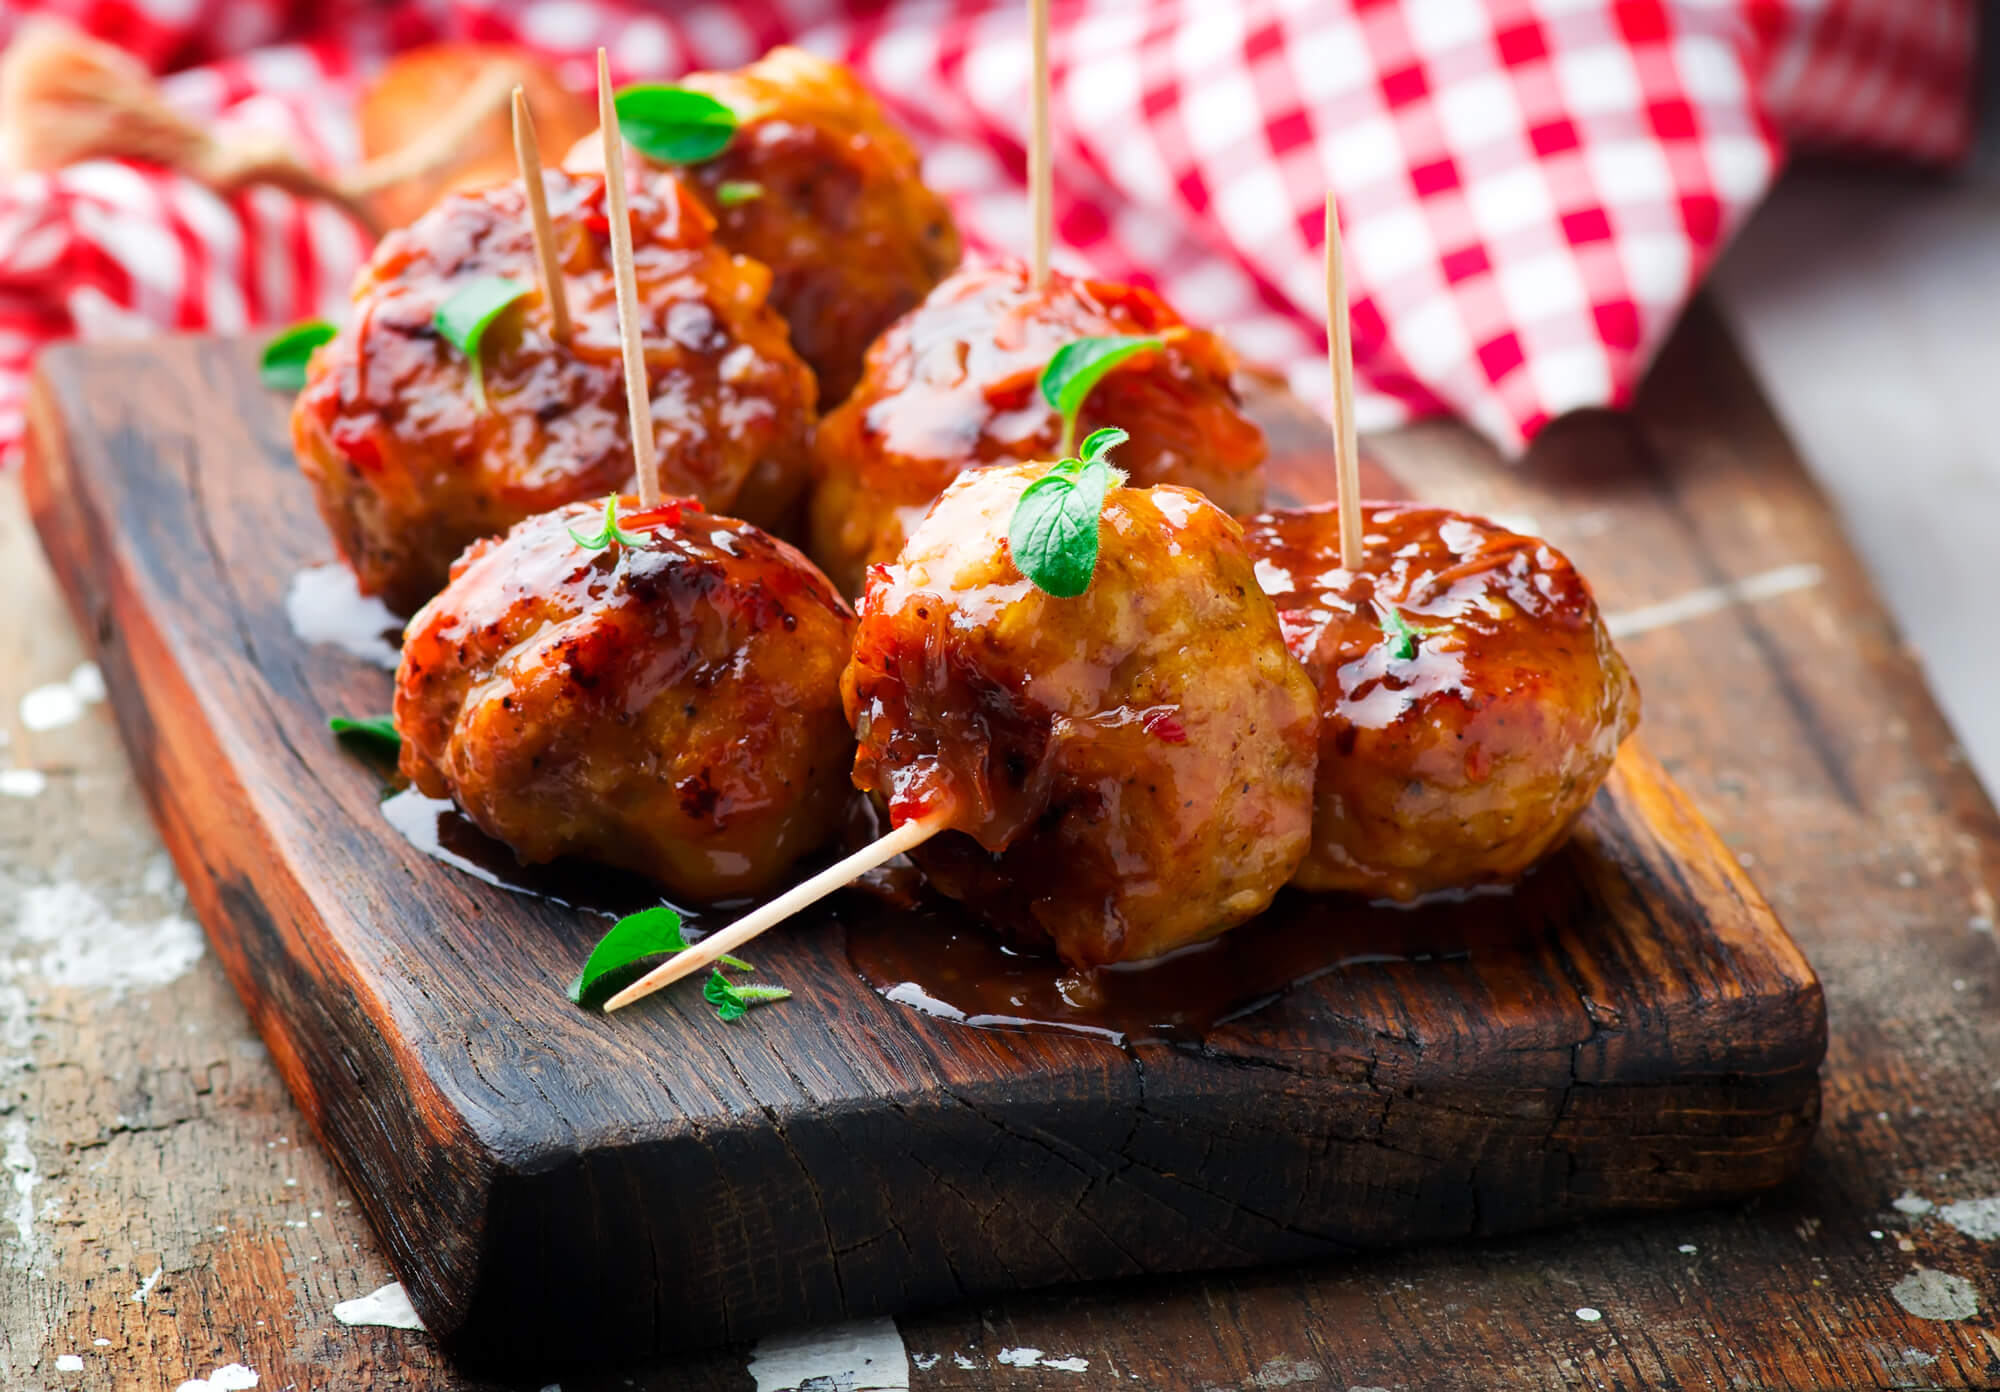 Meatballs on cutting board with toothpicks